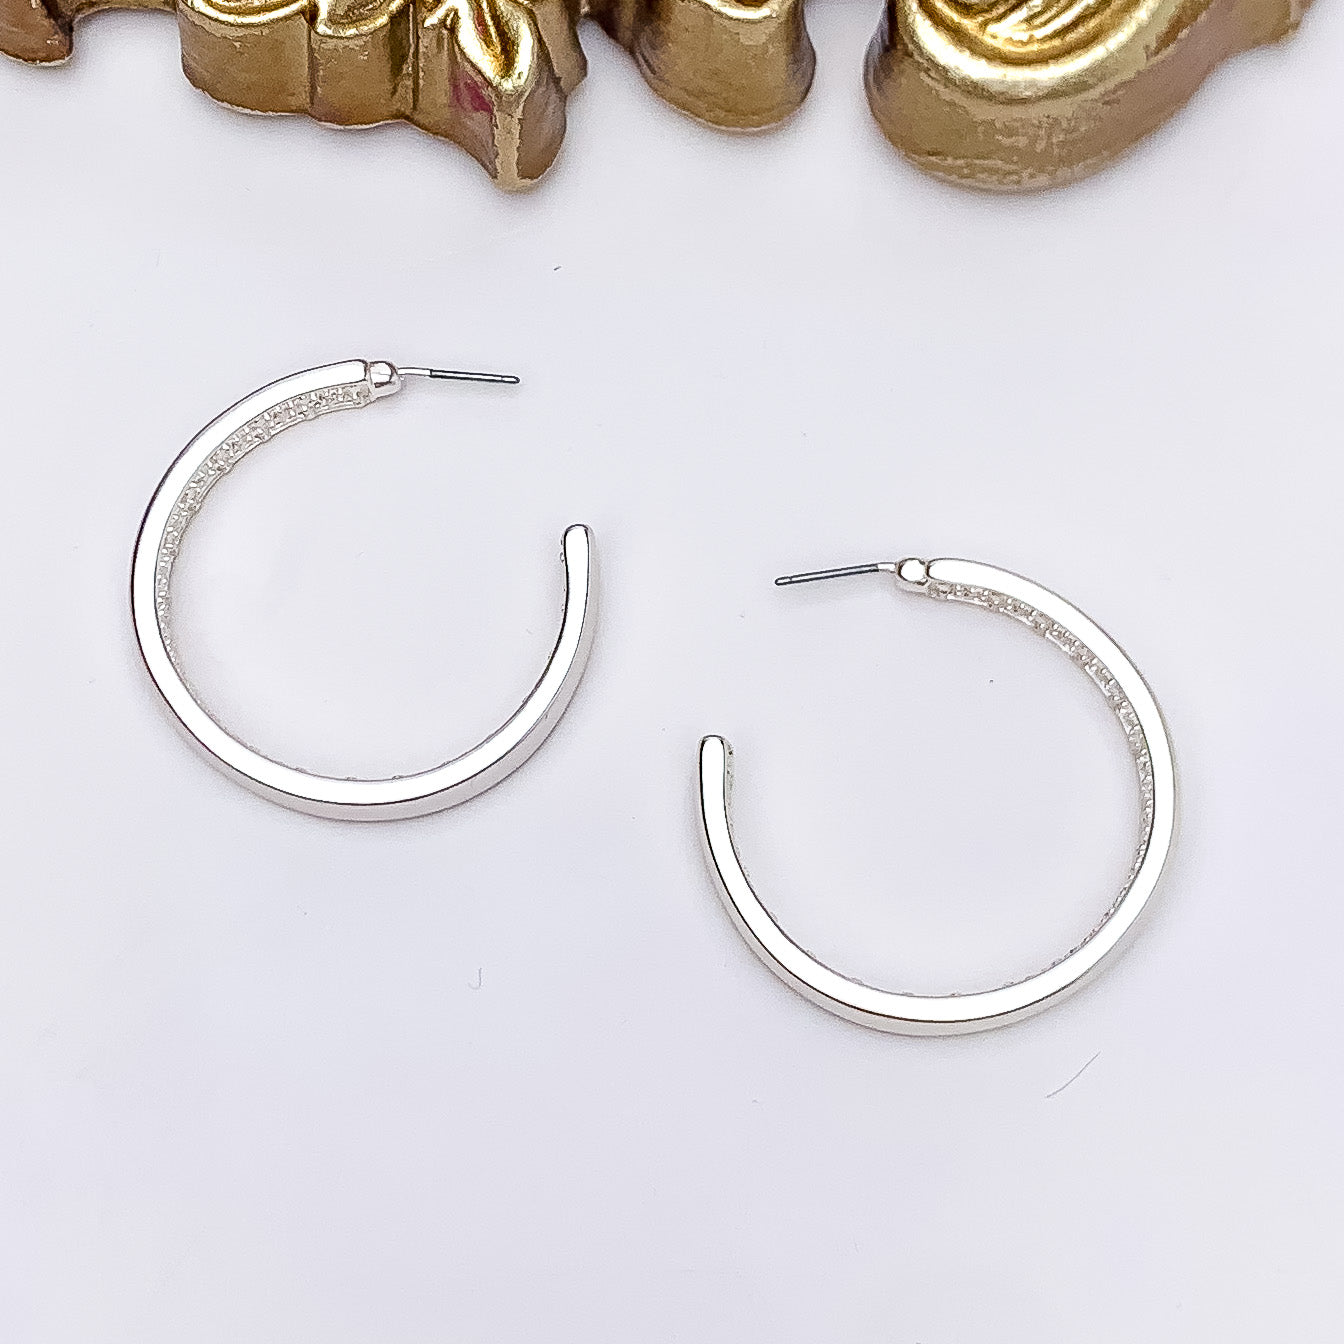 Silver Tone Large Hoop Earrings With a Textured Inside - Giddy Up Glamour Boutique